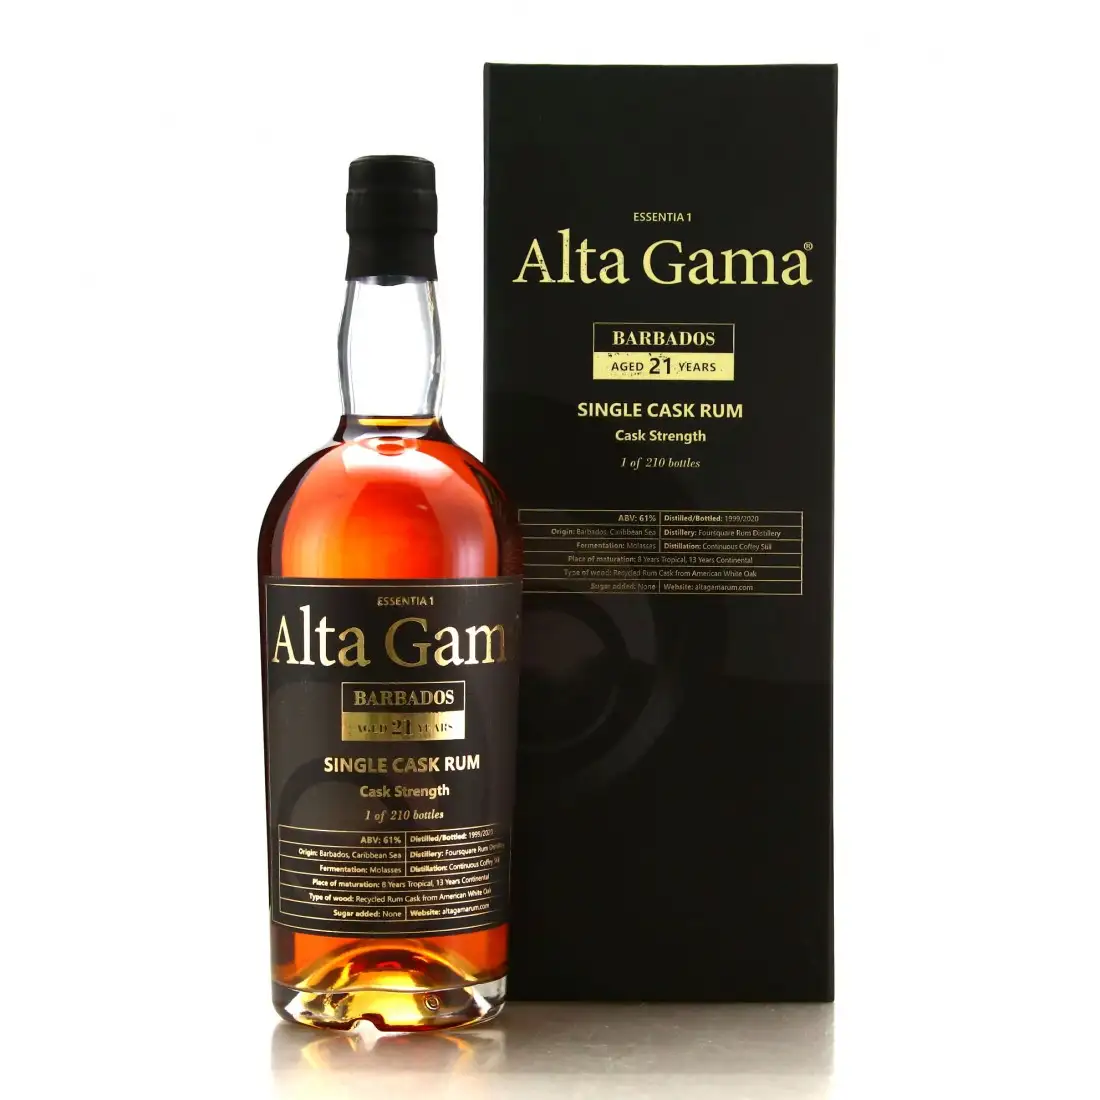 Image of the front of the bottle of the rum Alta Gama Essentia 1 Barbados